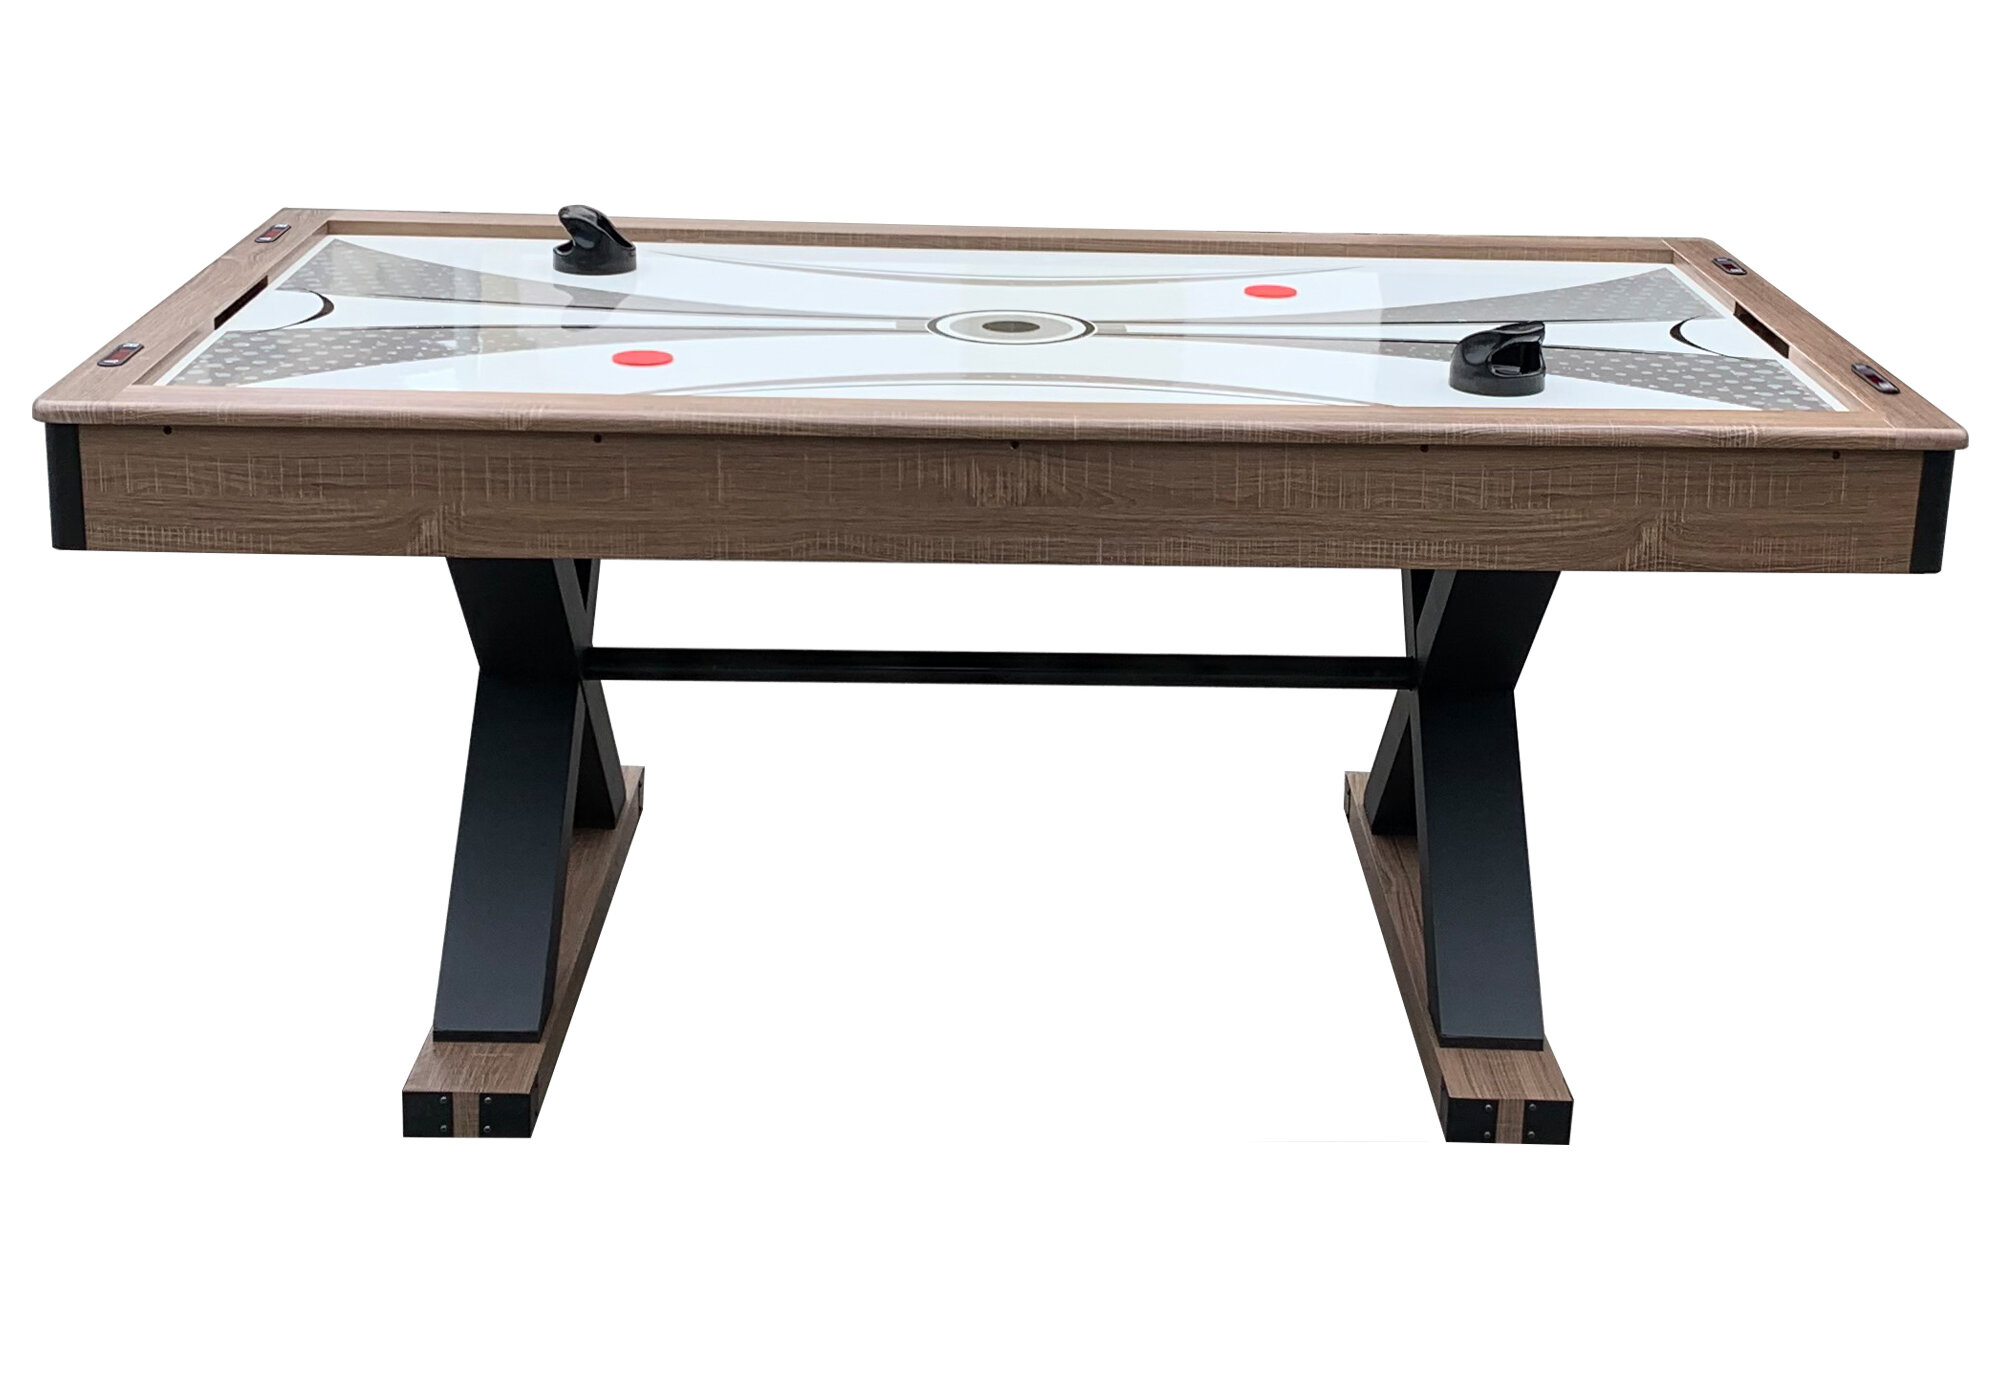 Supreme Unveils a New Air Hockey Table With a Built-in Scoring System –  Robb Report